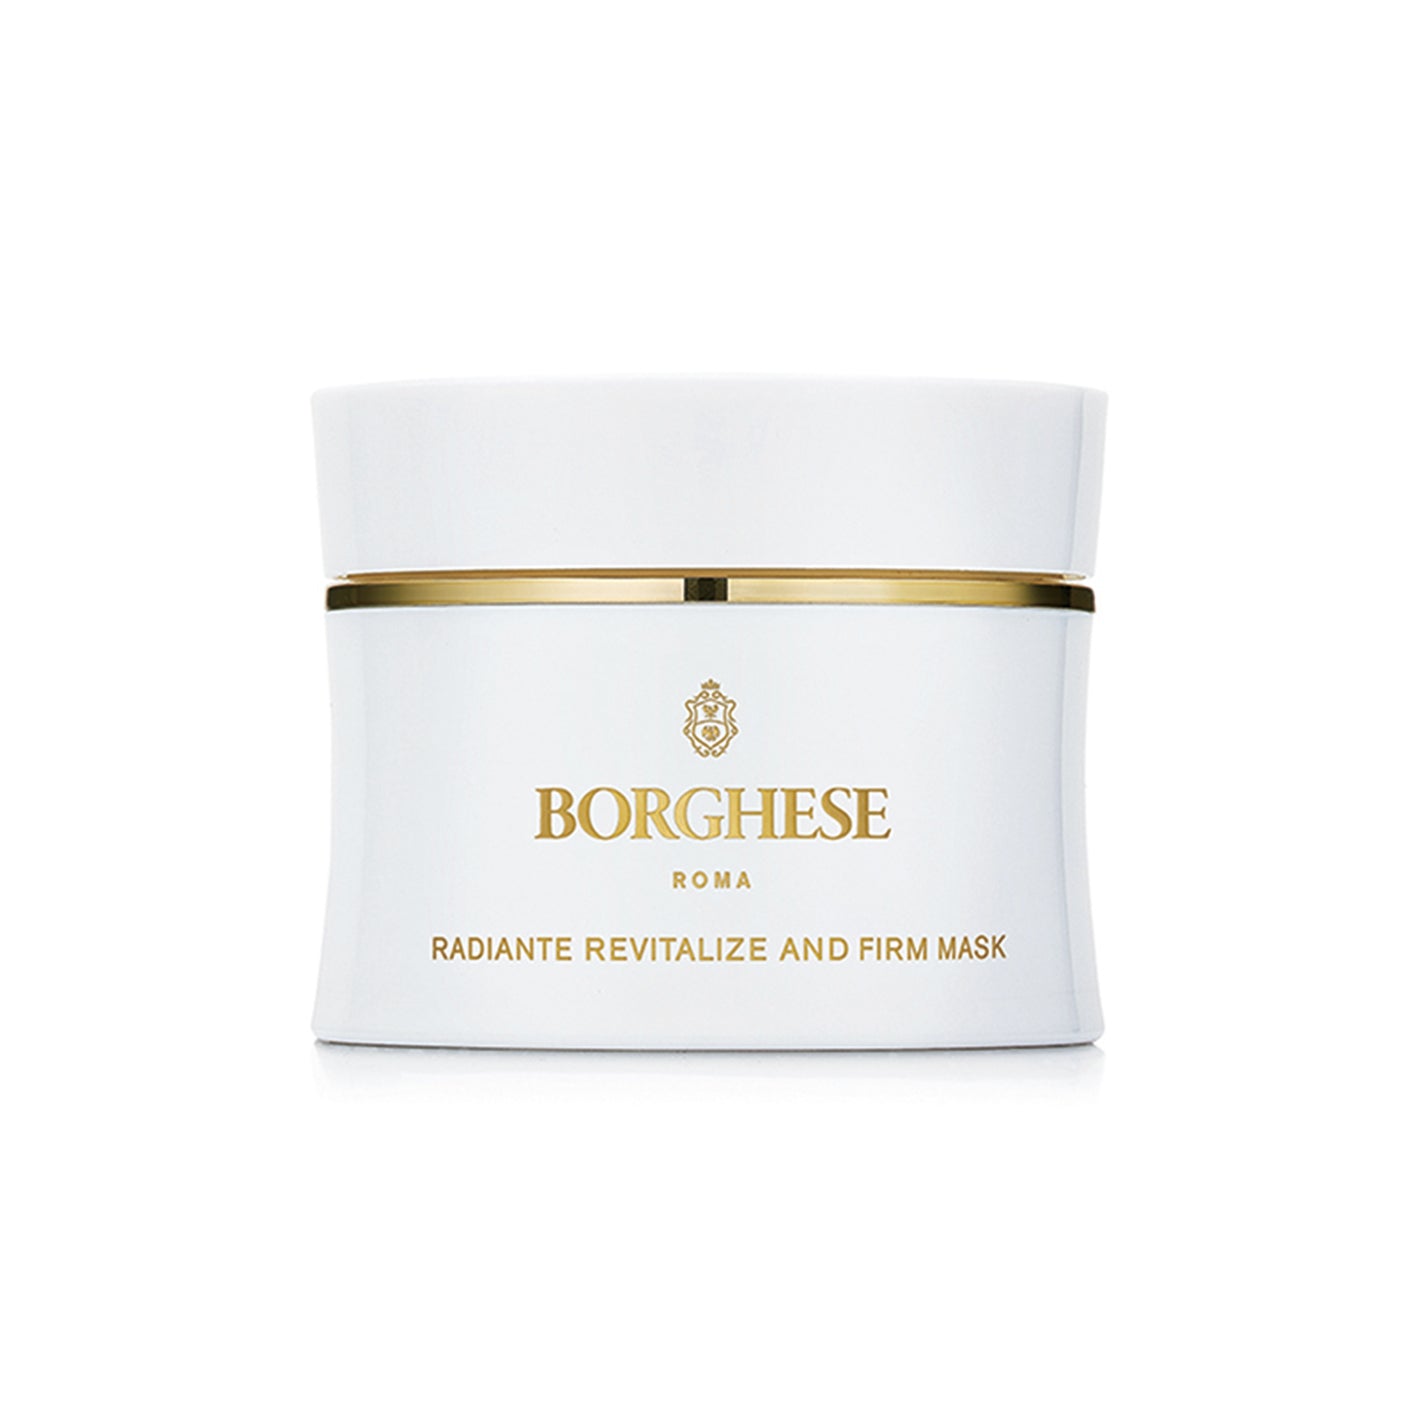 Radiante Revitalize and Firm Mask 贝佳斯焕彩修复紧致面膜 48g